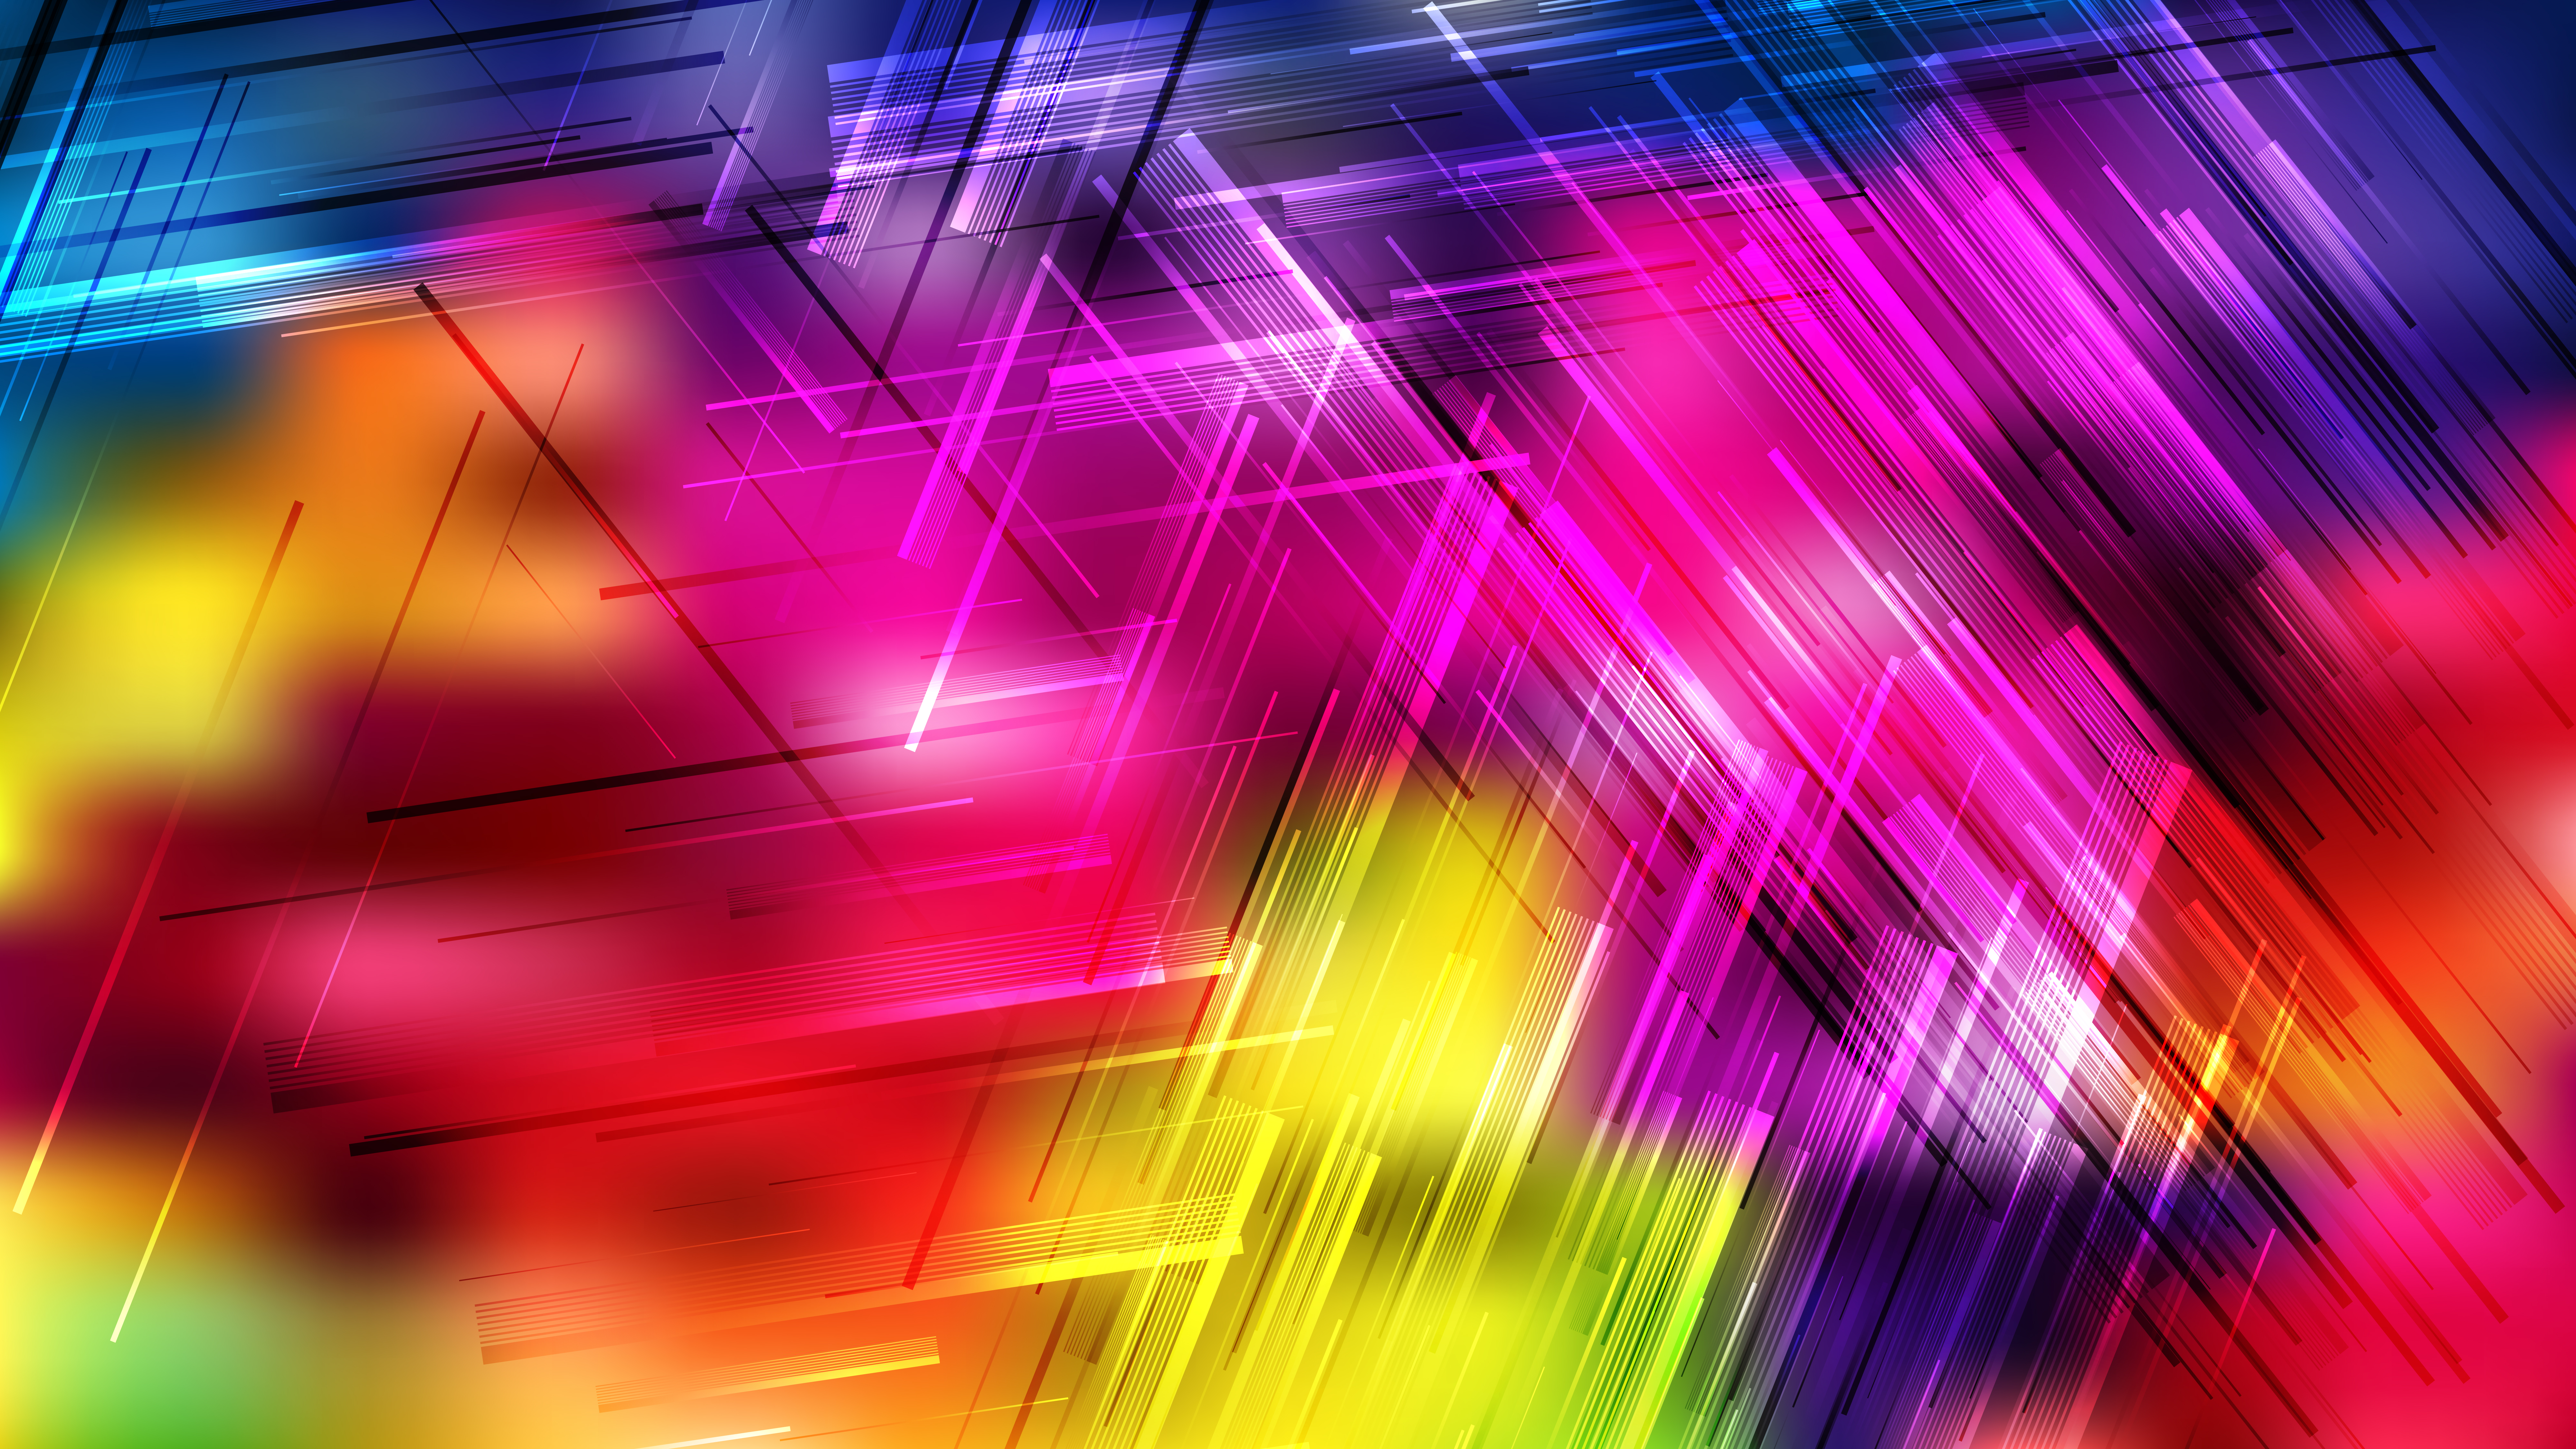 Colorful Random Chaotic Lines Abstract Background Design